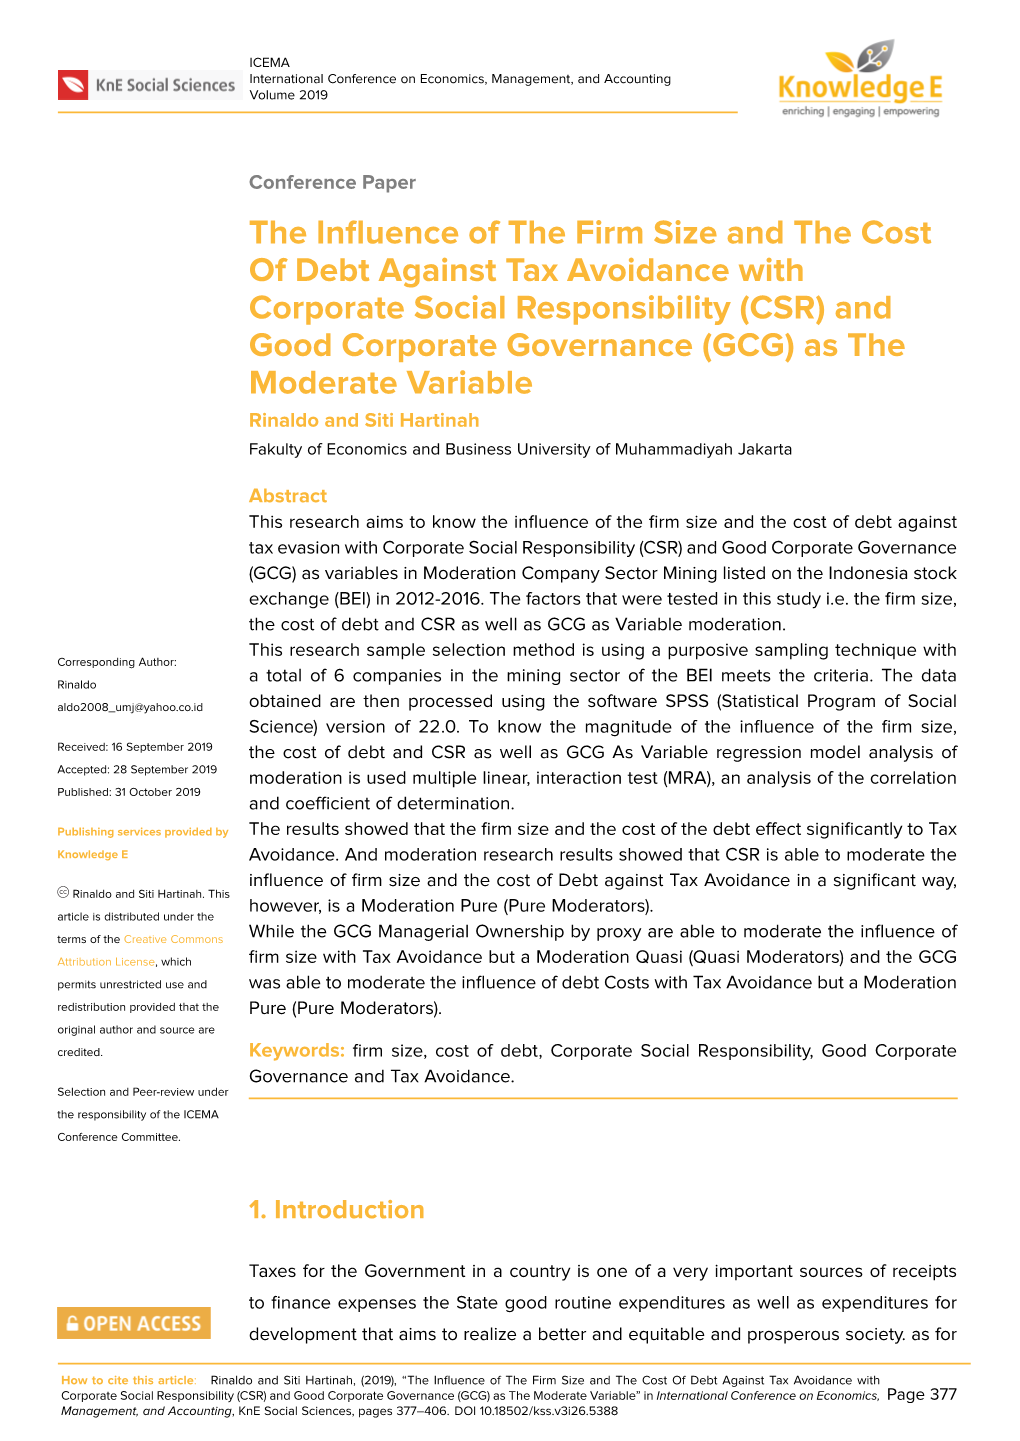 The Influence of the Firm Size and the Cost of Debt Against Tax Avoidance with Corporate Social Responsibility